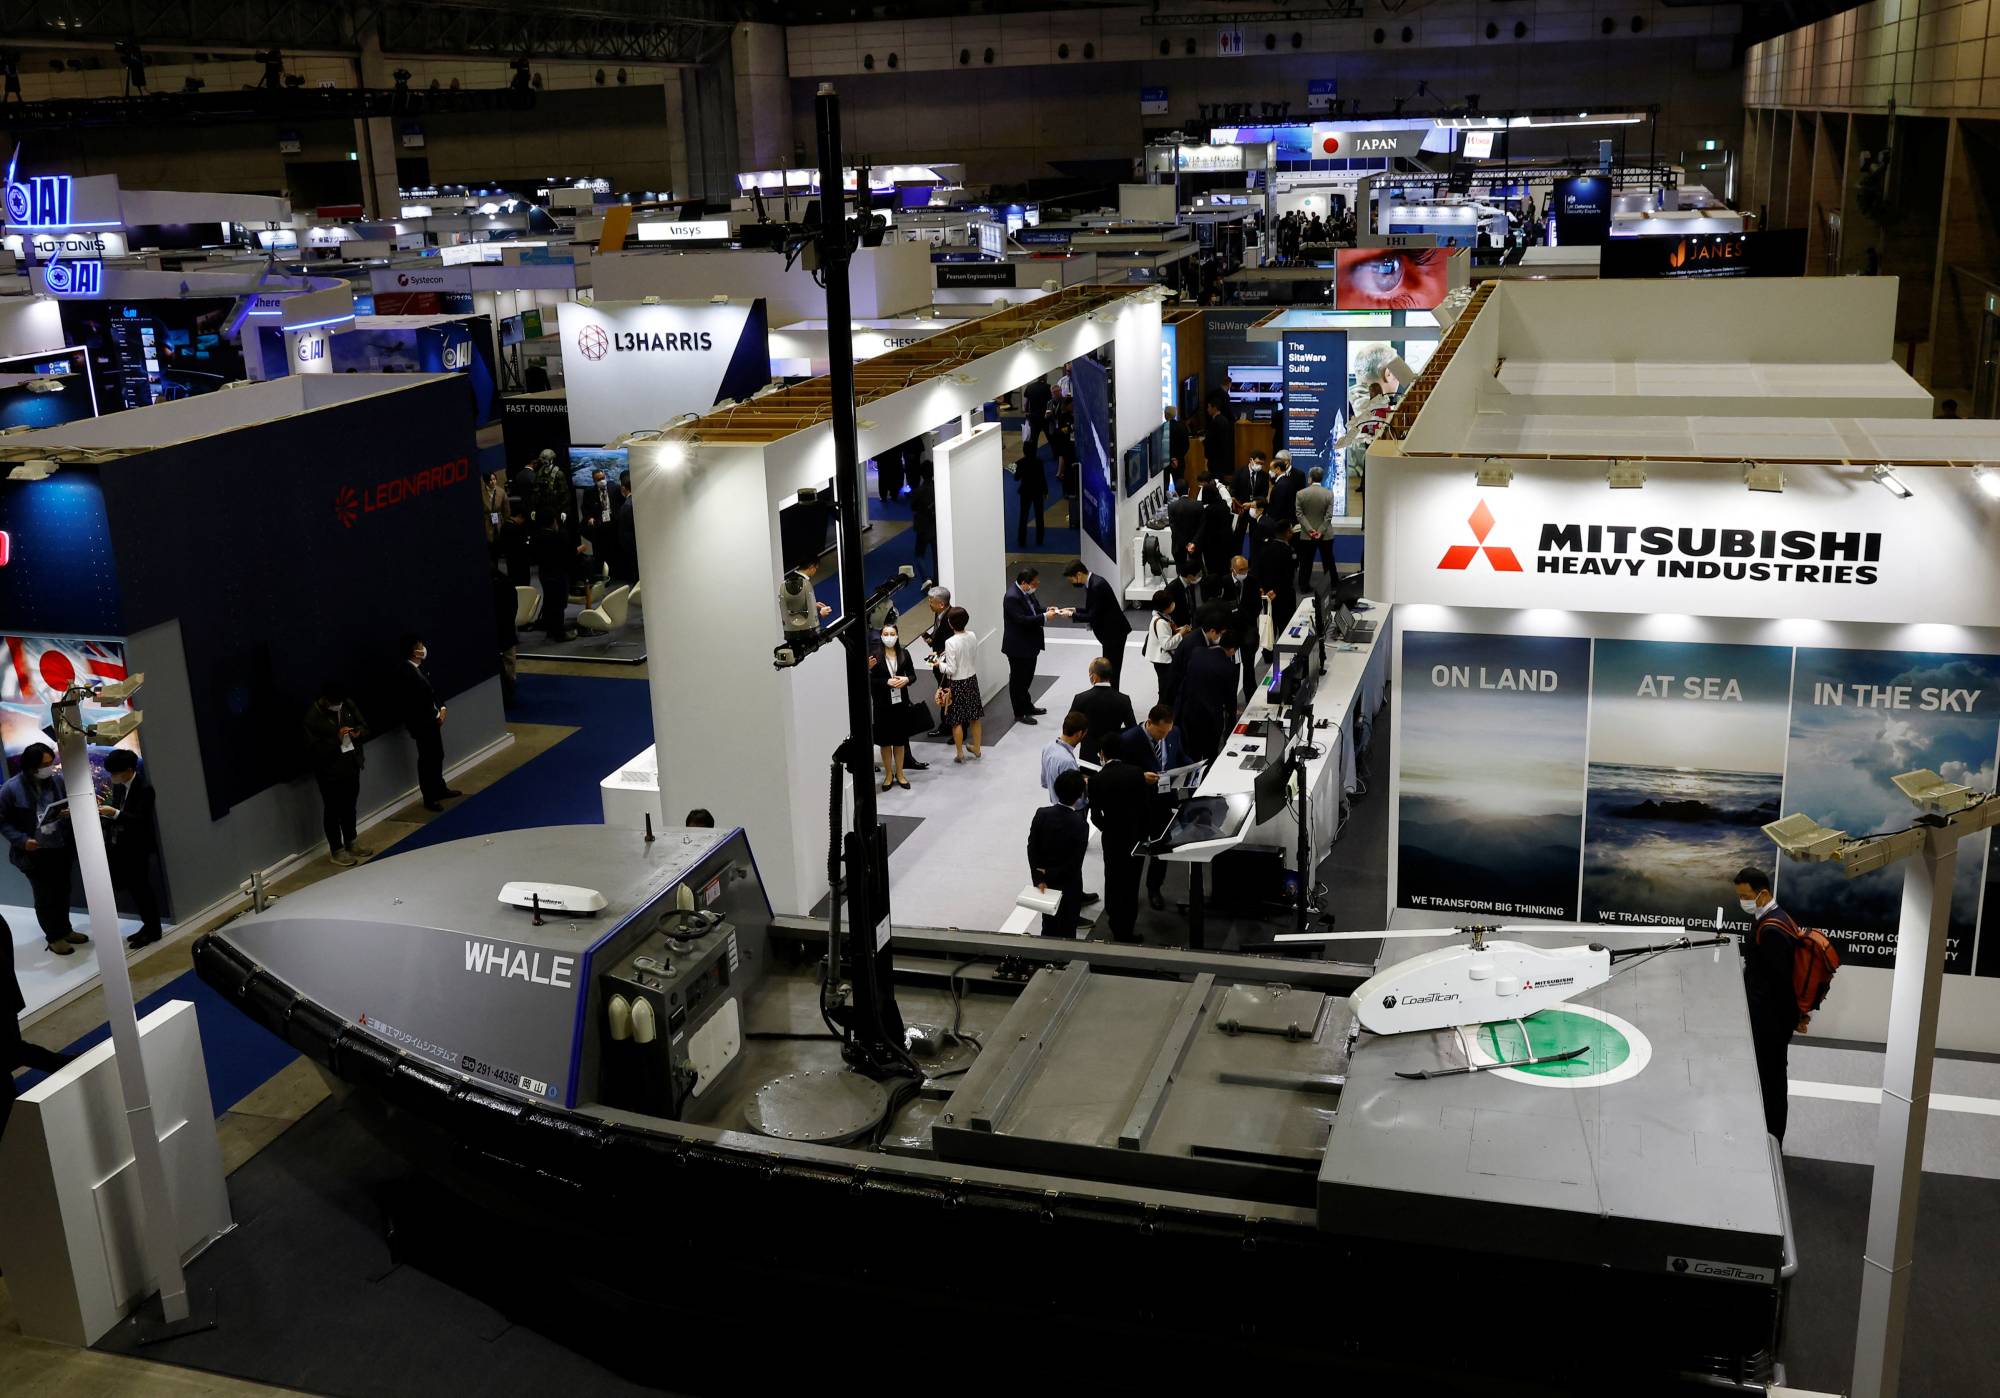 Mitsubishi Heavy Industries' unmanned surface vehicle is displayed at the DSEI Japan defense show at Makuhari Messe in the city of Chiba on March 15. | REUTERS